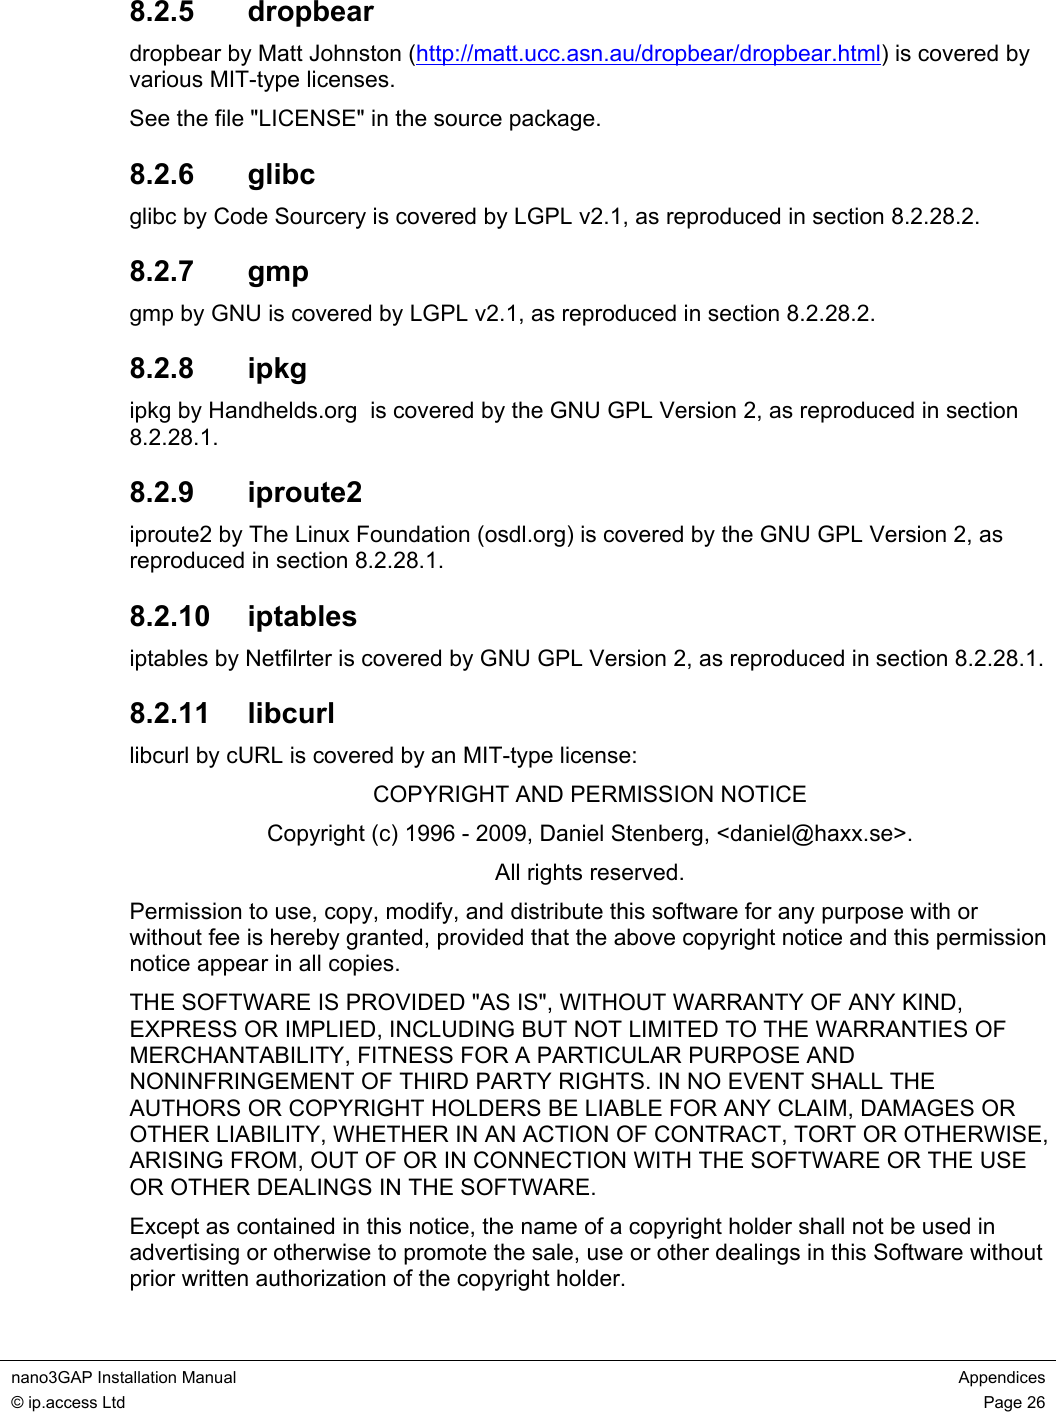  nano3GAP Installation Manual  Appendices © ip.access Ltd  Page 26  8.2.5  dropbear dropbear by Matt Johnston (http://matt.ucc.asn.au/dropbear/dropbear.html) is covered by various MIT-type licenses. See the file &quot;LICENSE&quot; in the source package. 8.2.6  glibc glibc by Code Sourcery is covered by LGPL v2.1, as reproduced in section 8.2.28.2. 8.2.7  gmp gmp by GNU is covered by LGPL v2.1, as reproduced in section 8.2.28.2. 8.2.8  ipkg ipkg by Handhelds.org  is covered by the GNU GPL Version 2, as reproduced in section 8.2.28.1. 8.2.9  iproute2 iproute2 by The Linux Foundation (osdl.org) is covered by the GNU GPL Version 2, as reproduced in section 8.2.28.1. 8.2.10  iptables iptables by Netfilrter is covered by GNU GPL Version 2, as reproduced in section 8.2.28.1. 8.2.11  libcurl libcurl by cURL is covered by an MIT-type license: COPYRIGHT AND PERMISSION NOTICE Copyright (c) 1996 - 2009, Daniel Stenberg, &lt;daniel@haxx.se&gt;. All rights reserved. Permission to use, copy, modify, and distribute this software for any purpose with or without fee is hereby granted, provided that the above copyright notice and this permission notice appear in all copies. THE SOFTWARE IS PROVIDED &quot;AS IS&quot;, WITHOUT WARRANTY OF ANY KIND, EXPRESS OR IMPLIED, INCLUDING BUT NOT LIMITED TO THE WARRANTIES OF MERCHANTABILITY, FITNESS FOR A PARTICULAR PURPOSE AND NONINFRINGEMENT OF THIRD PARTY RIGHTS. IN NO EVENT SHALL THE AUTHORS OR COPYRIGHT HOLDERS BE LIABLE FOR ANY CLAIM, DAMAGES OR OTHER LIABILITY, WHETHER IN AN ACTION OF CONTRACT, TORT OR OTHERWISE, ARISING FROM, OUT OF OR IN CONNECTION WITH THE SOFTWARE OR THE USE OR OTHER DEALINGS IN THE SOFTWARE. Except as contained in this notice, the name of a copyright holder shall not be used in advertising or otherwise to promote the sale, use or other dealings in this Software without prior written authorization of the copyright holder. 